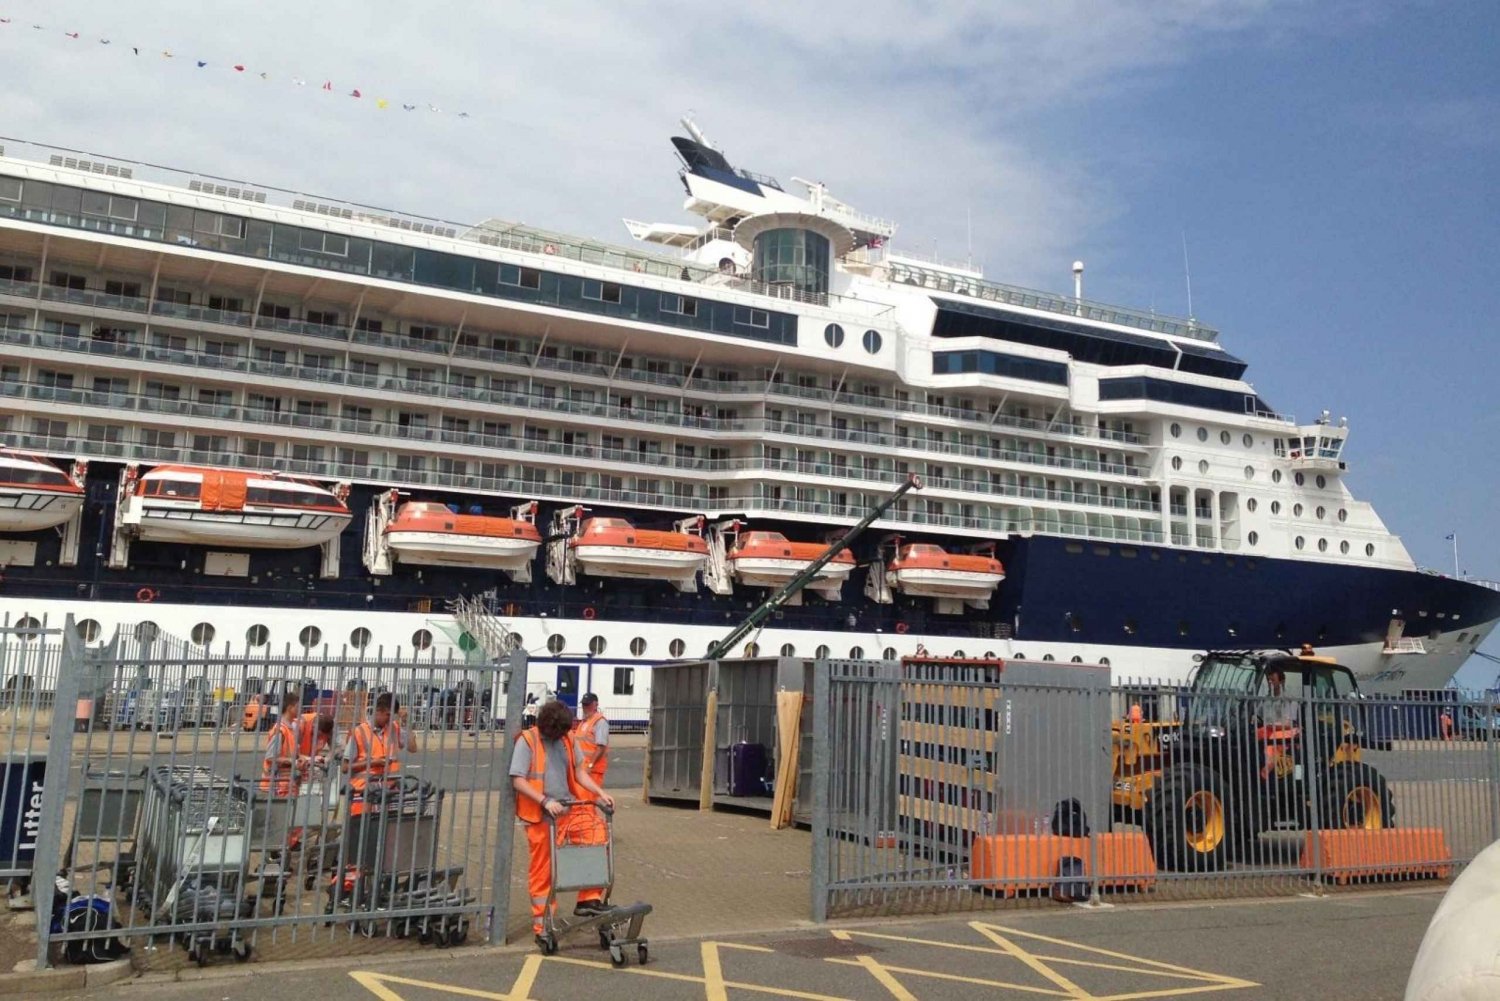 From London: Transfer to Southampton City Cruise Terminal